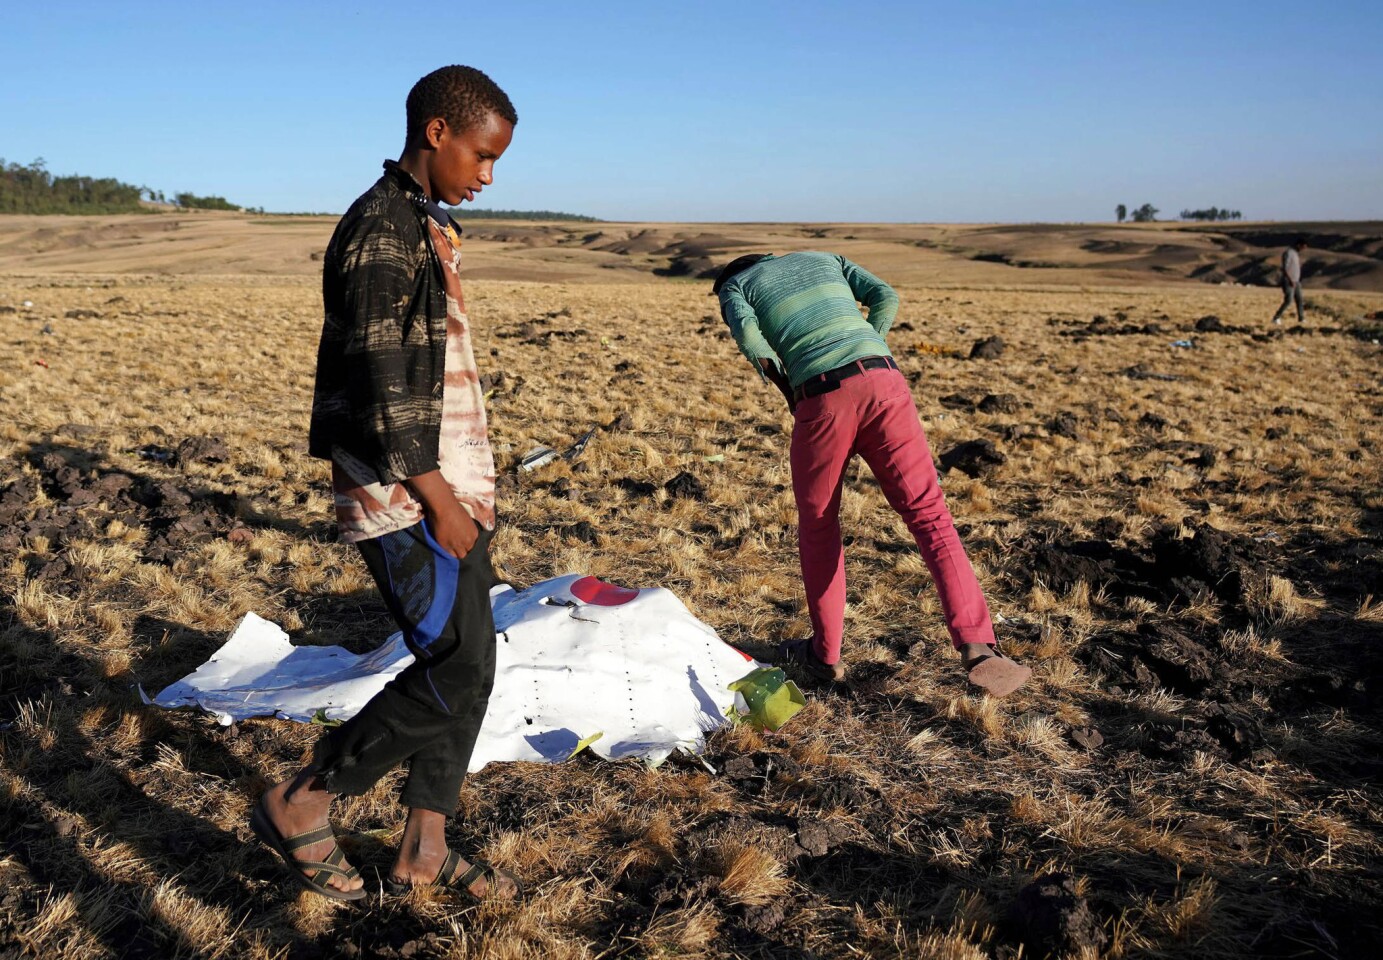 Local residents look at debris at the scene where Ethiopian Airlines Flight 302 crashed in a wheat field just outside the town of Bishoftu.